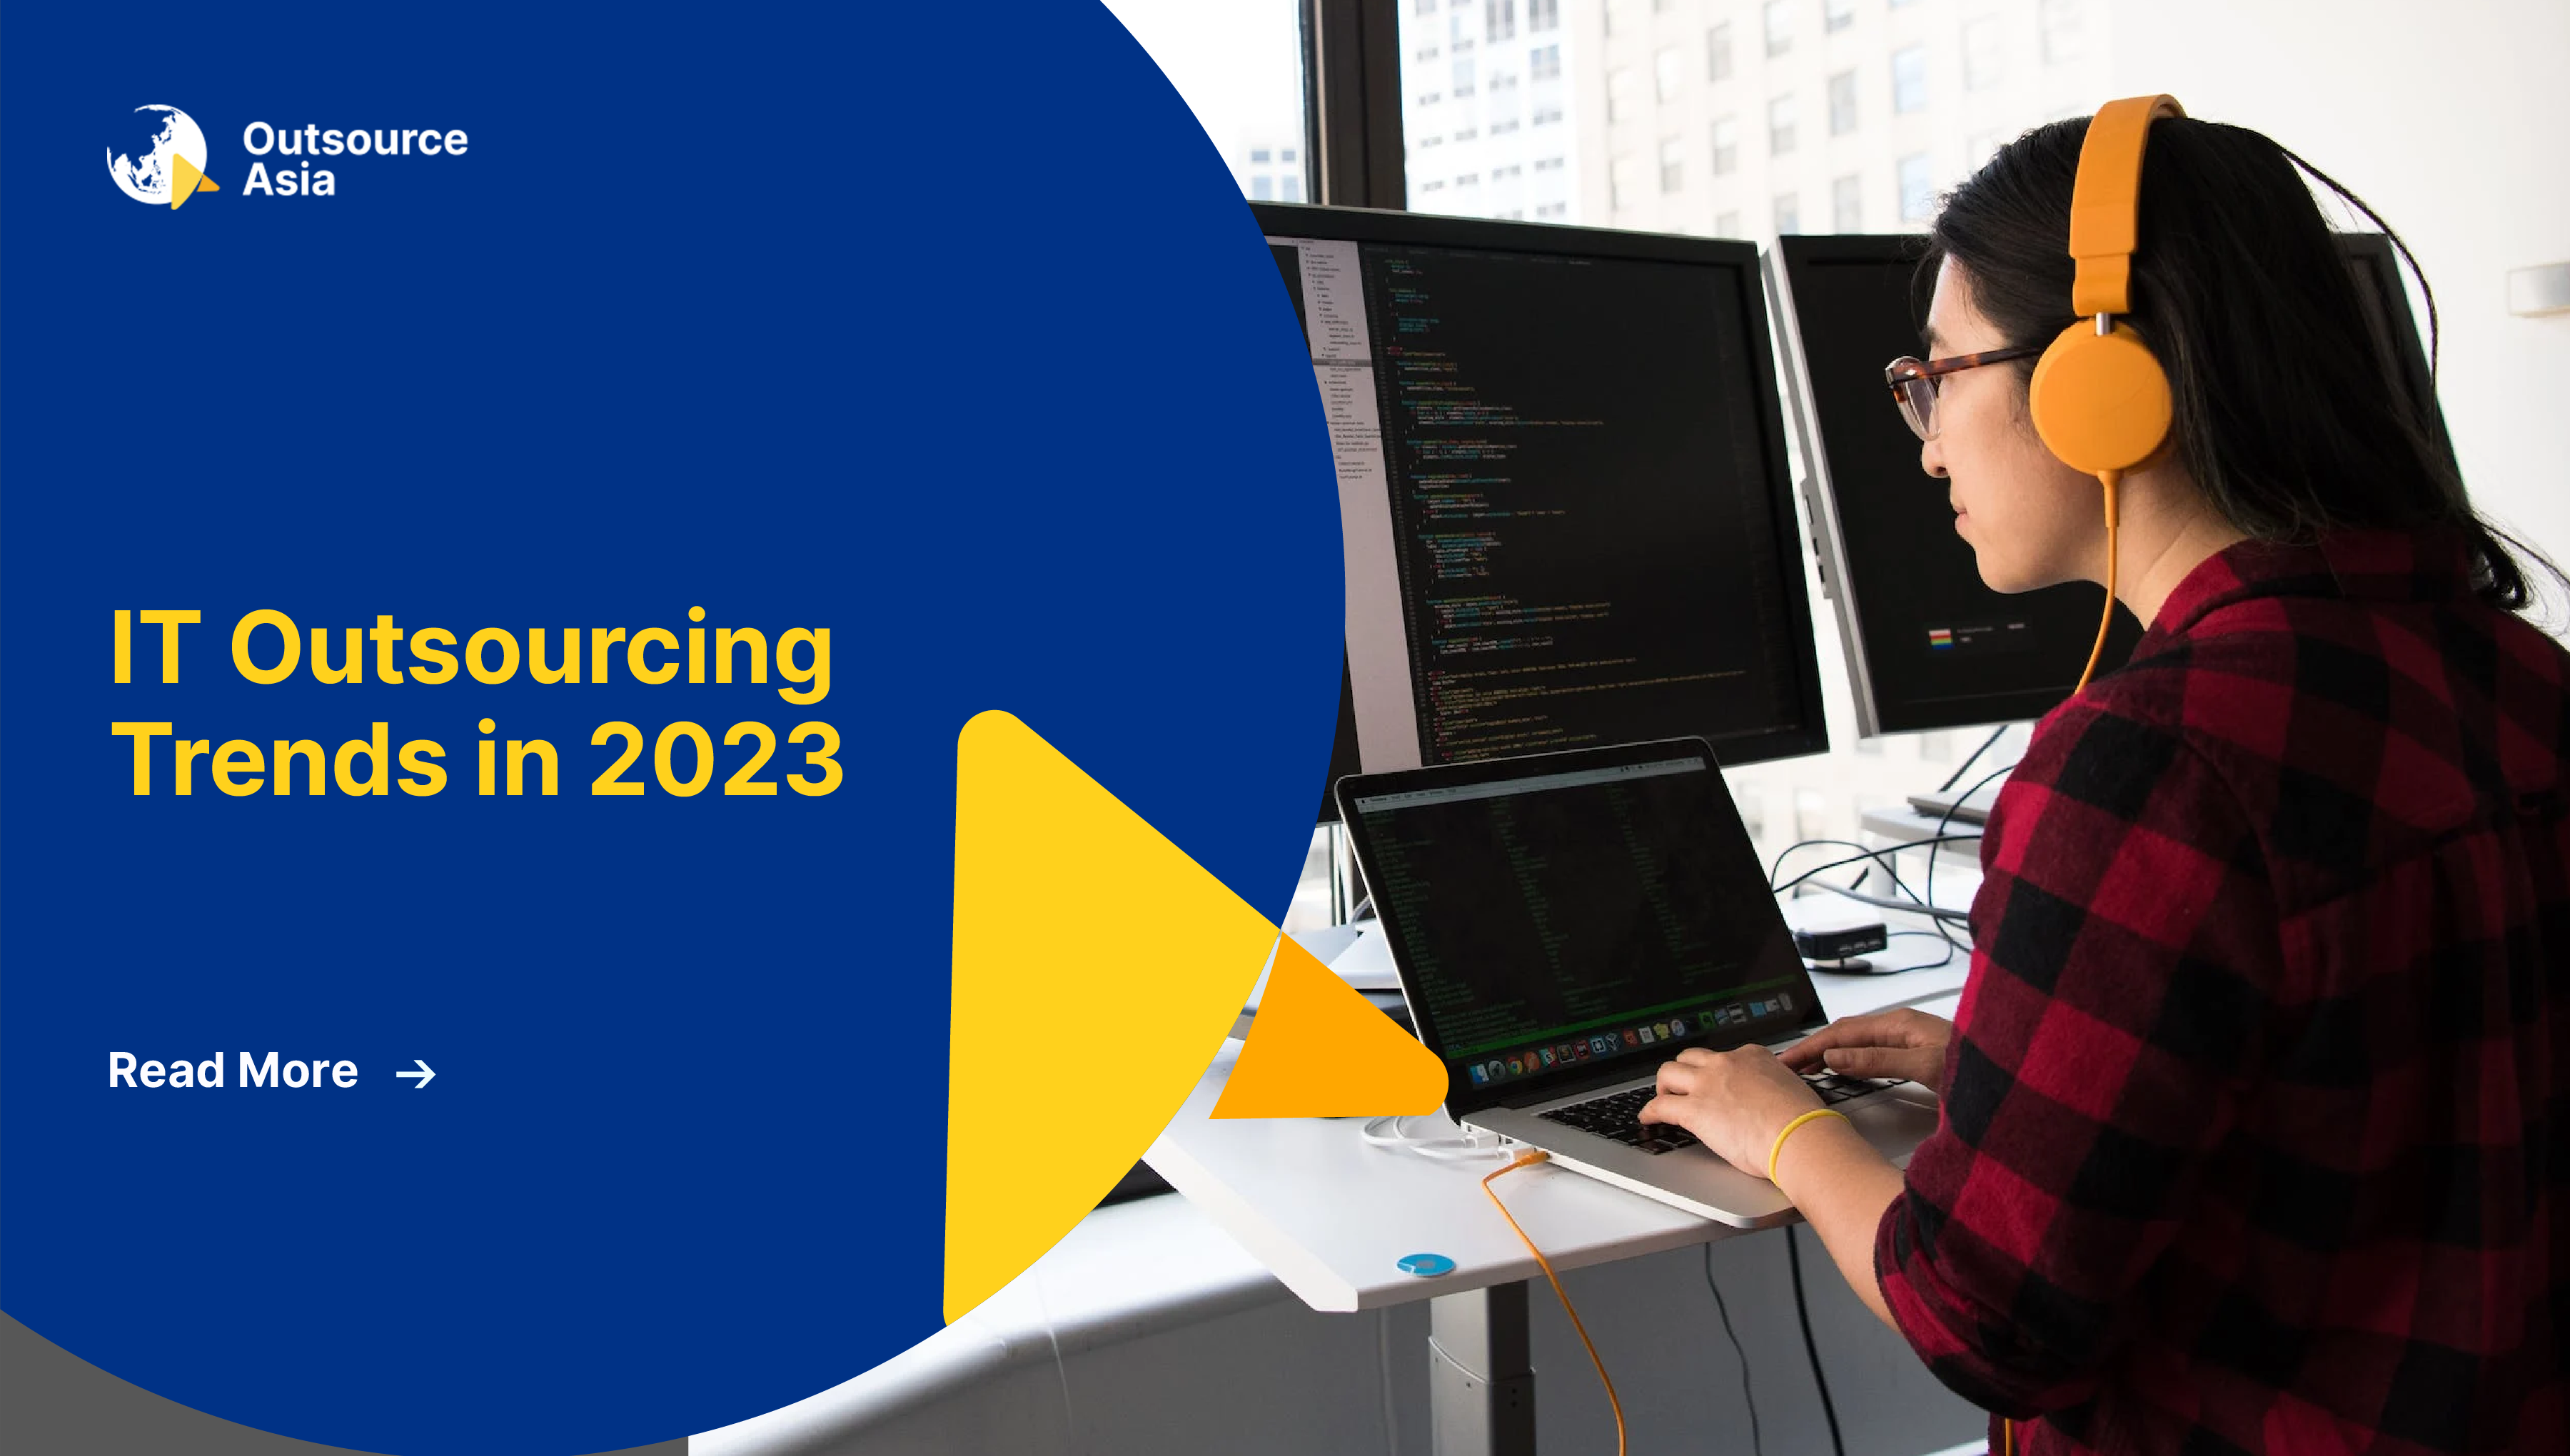 IT Outsourcing Trends in 2023